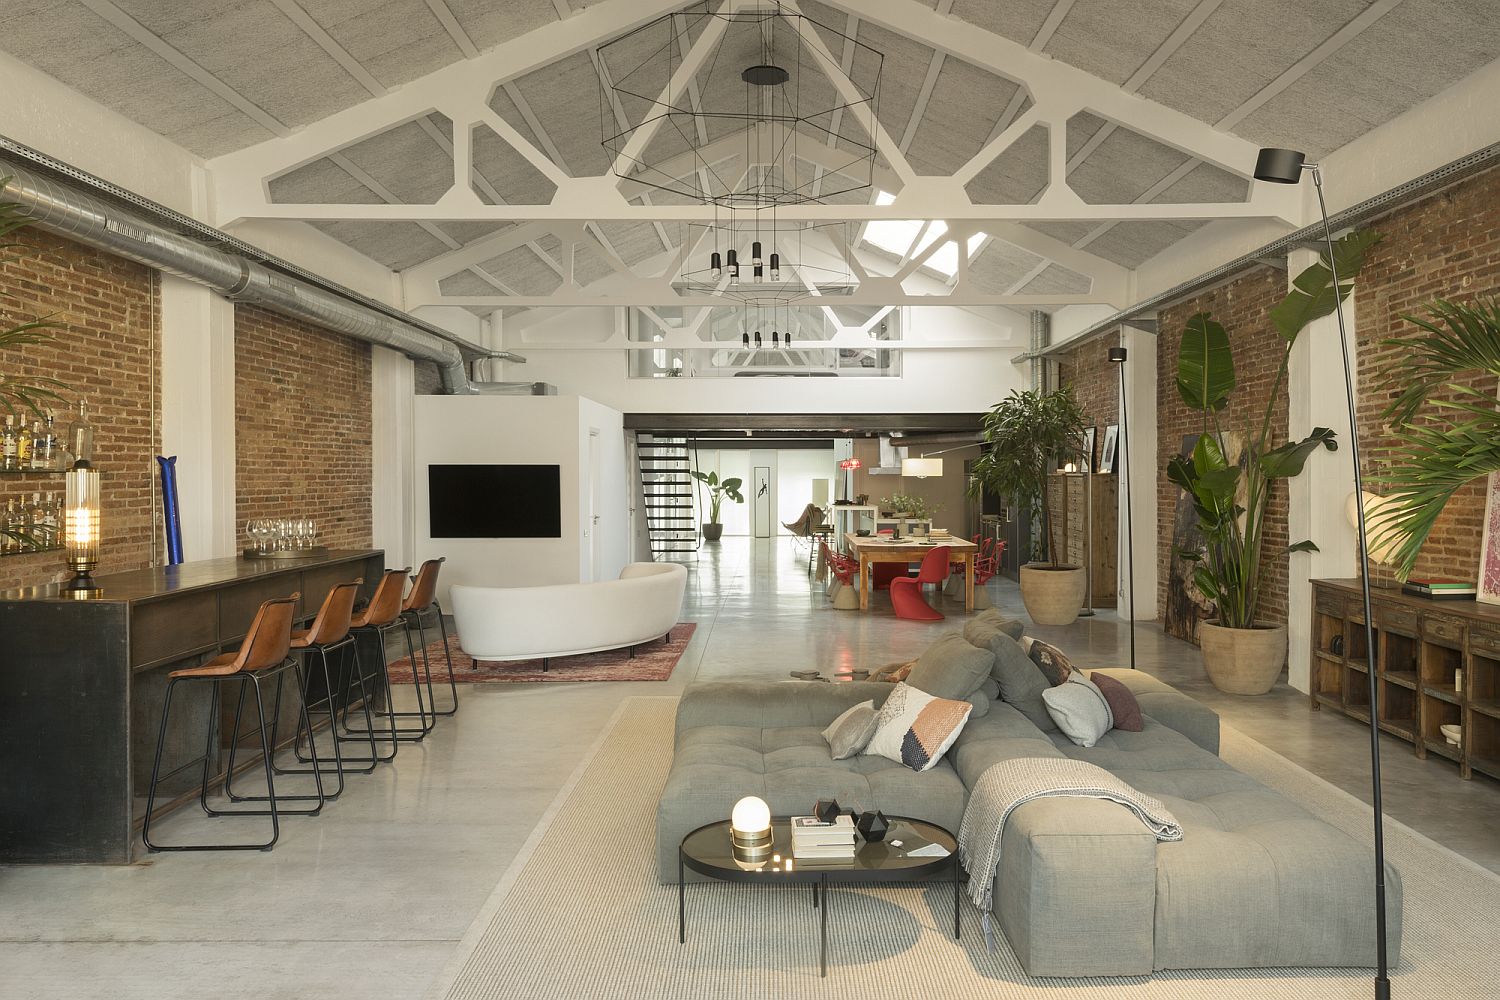 Delightful-vaulted-ceiling-in-white-adds-contemporary-appeal-to-the-industrial-loft